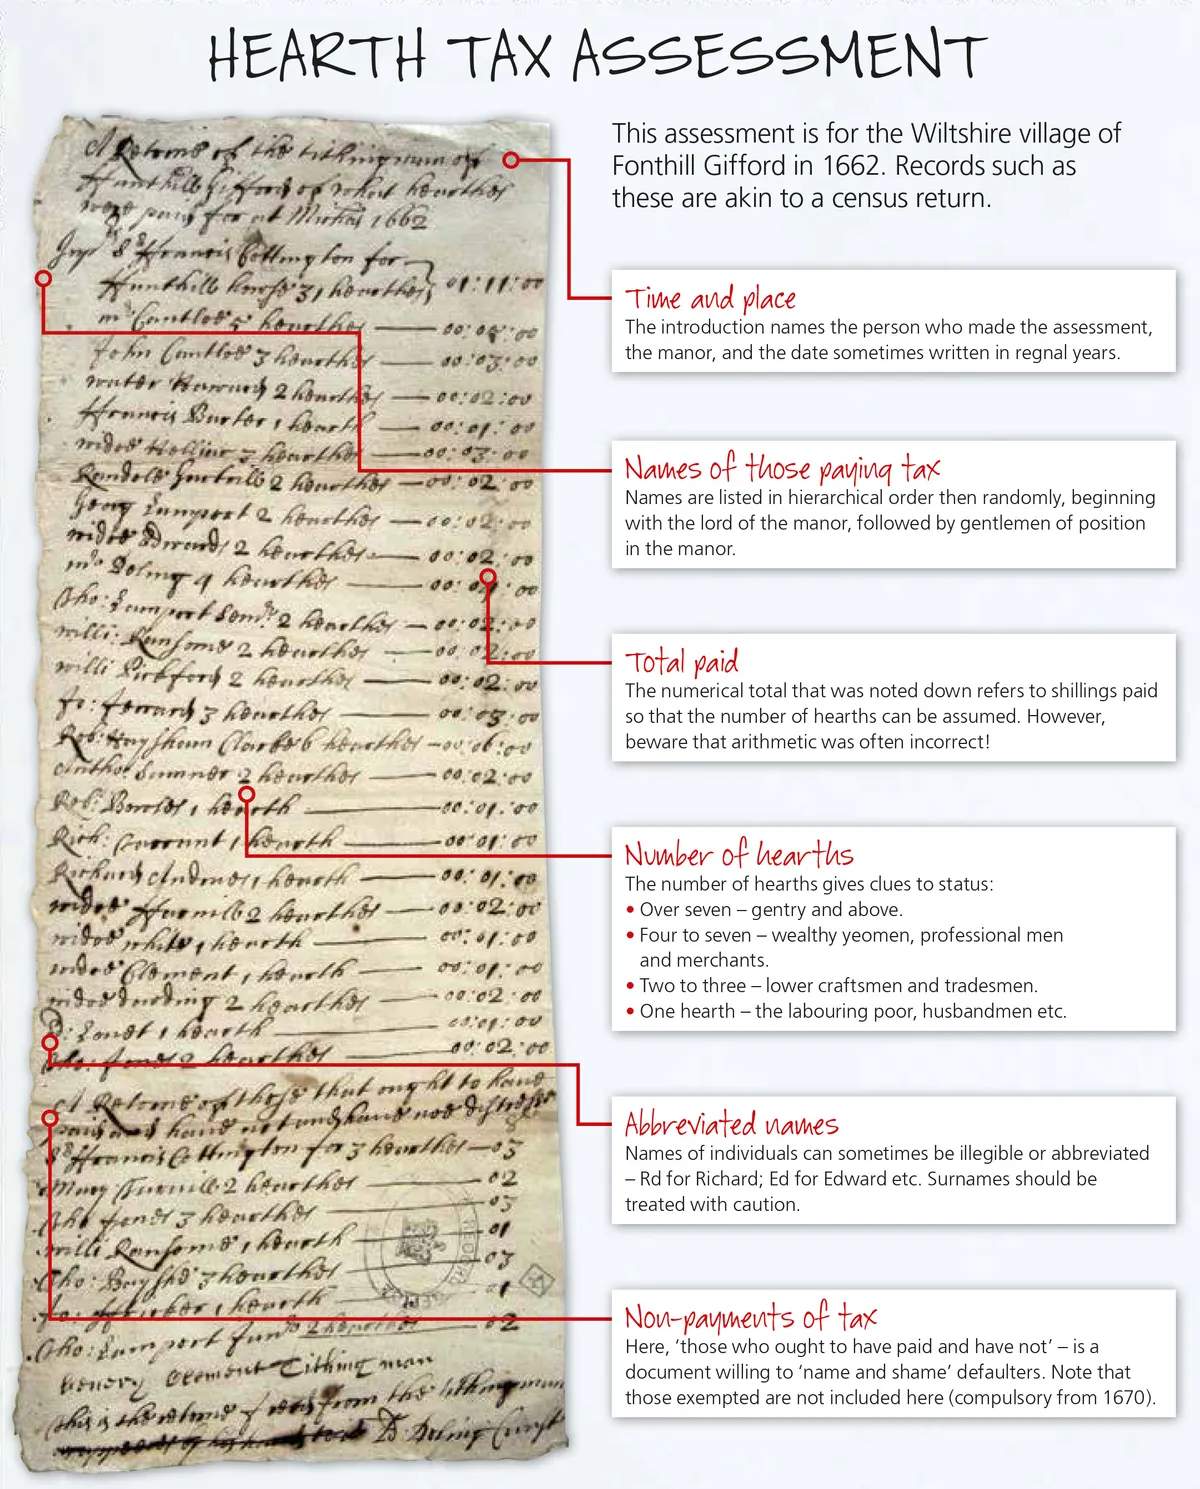 Annotated Hearth Tax return from 1662